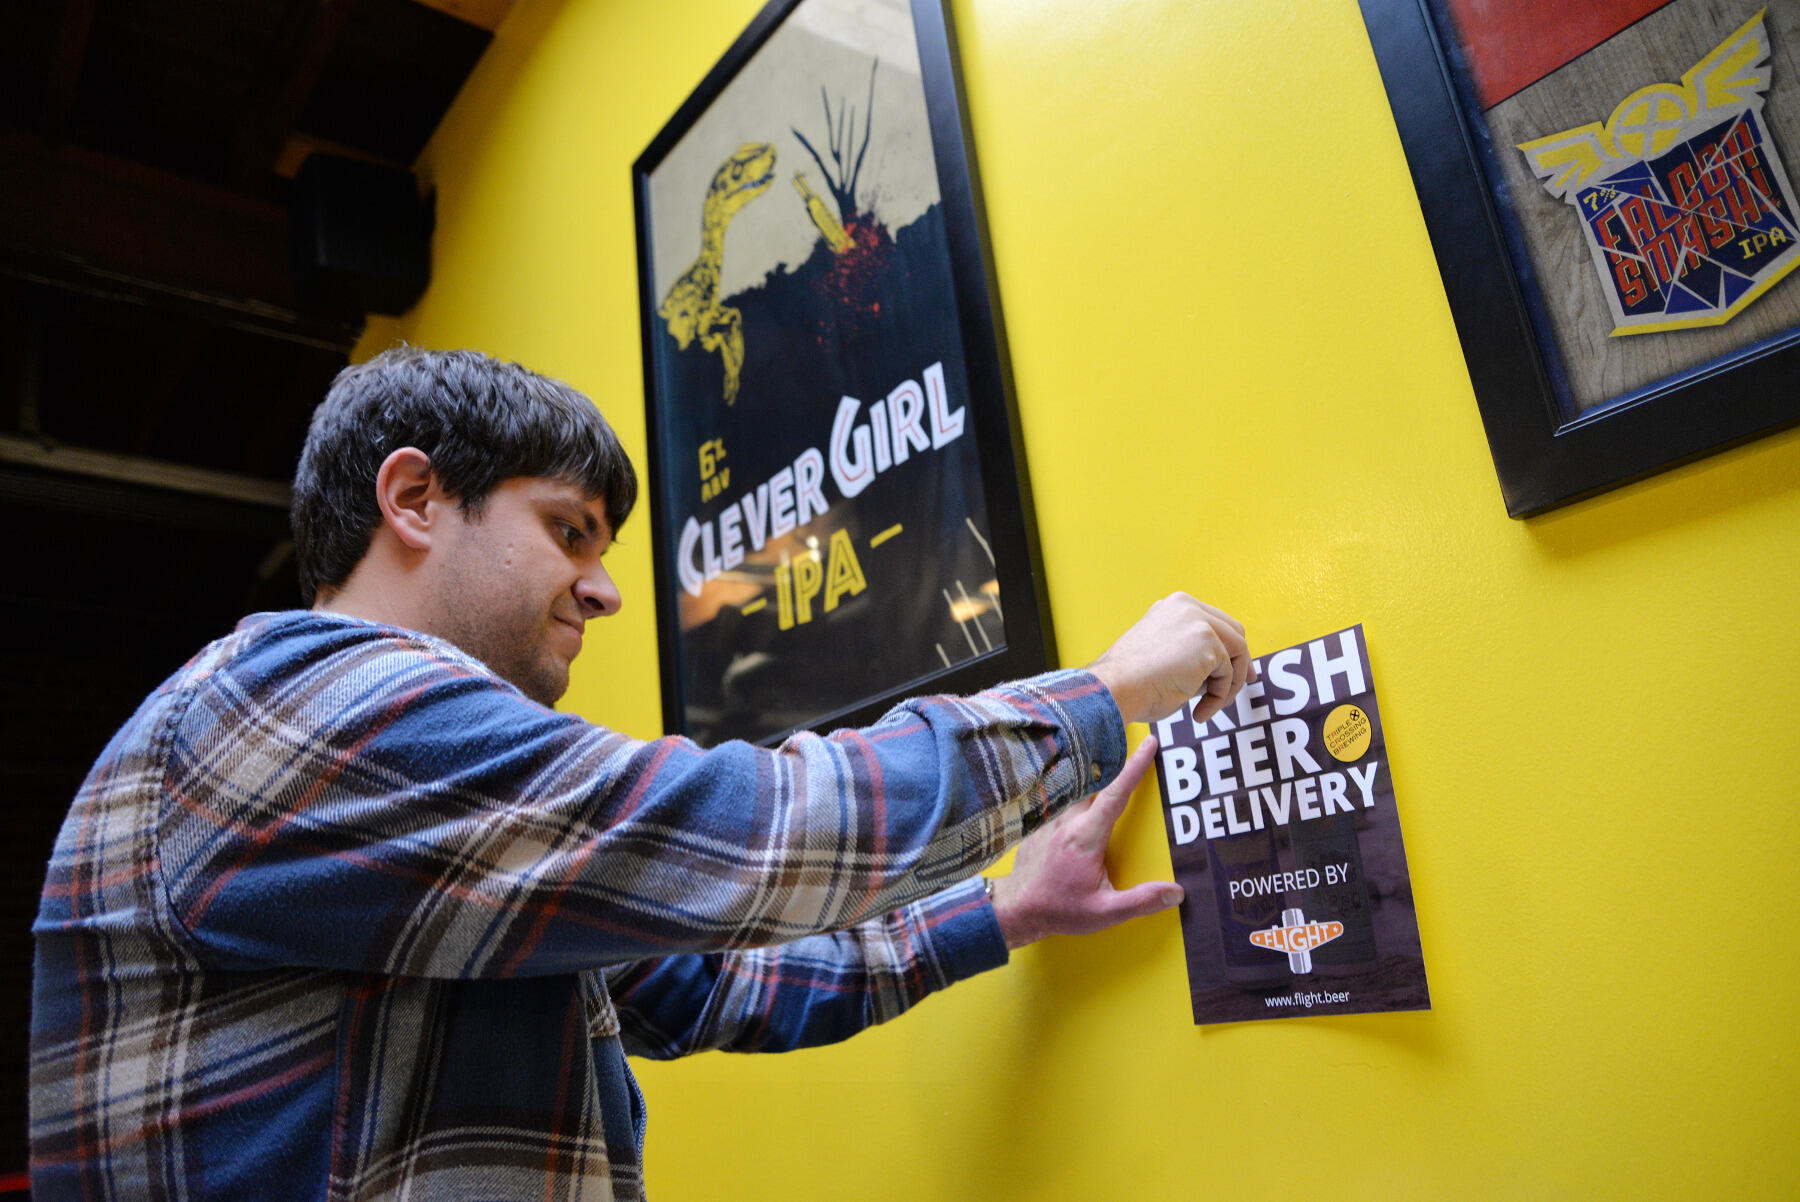 At Triple Crossing Brewing, Flight co-founder Matthew Teachey tapes up a flyer about his craft beer delivery service, seeking to raise awareness among Richmond craft beer fans.